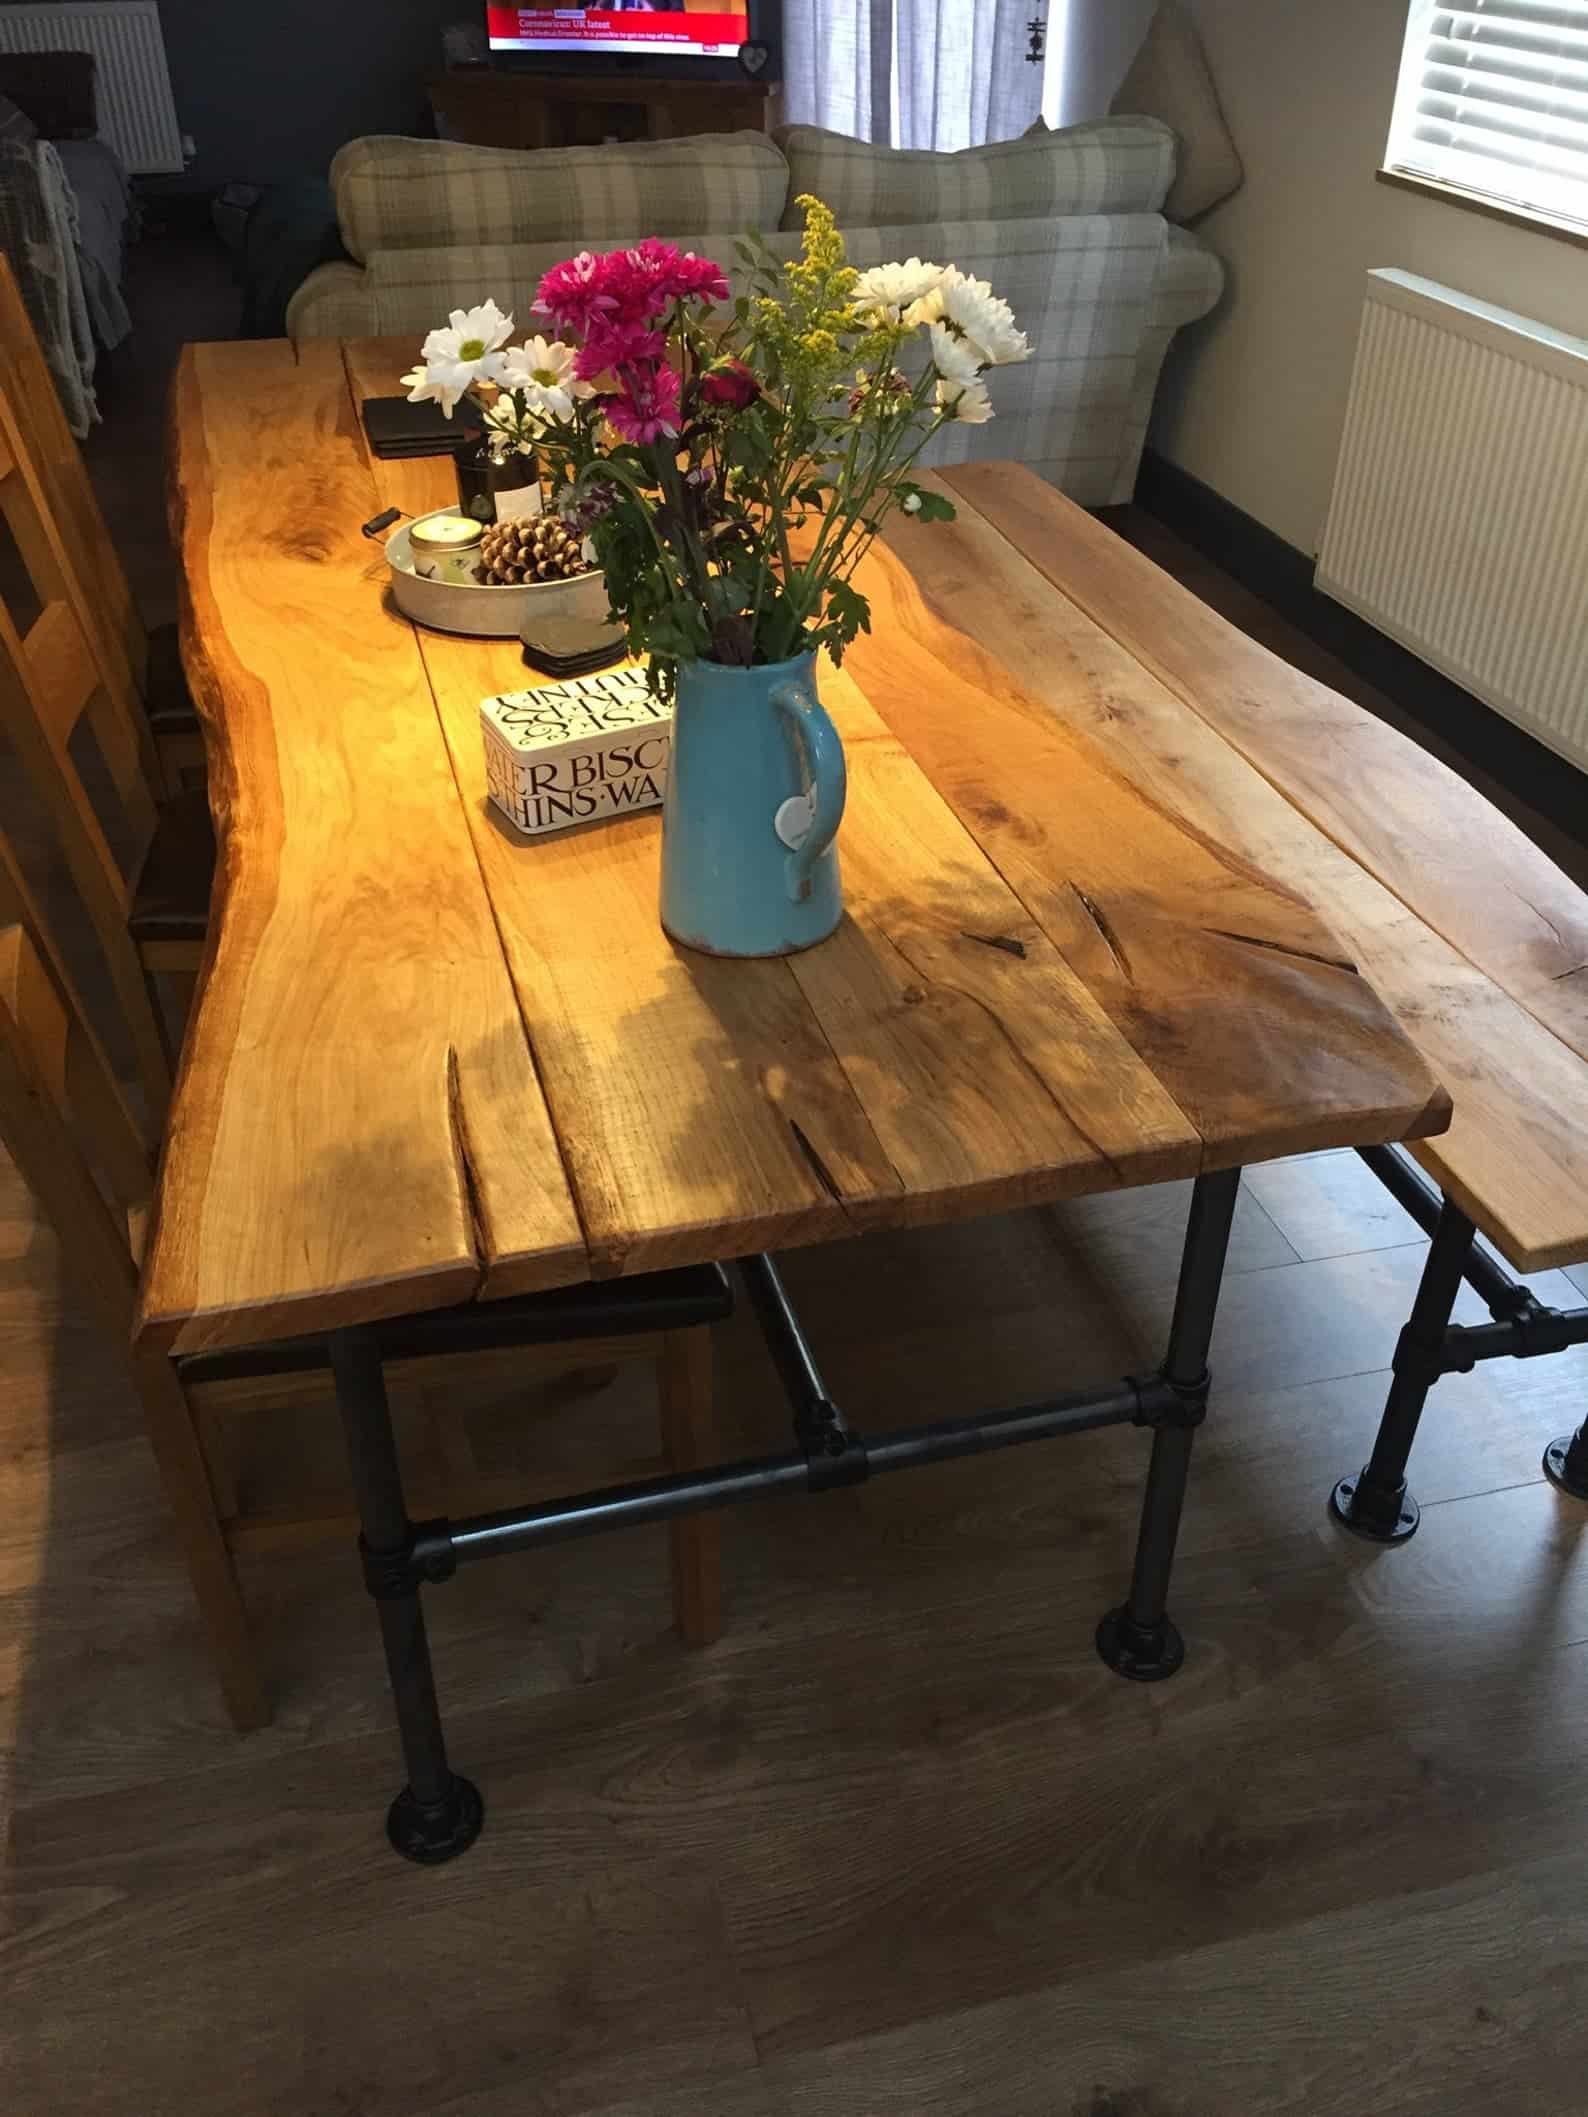 Steel tube handcrafted live edge table